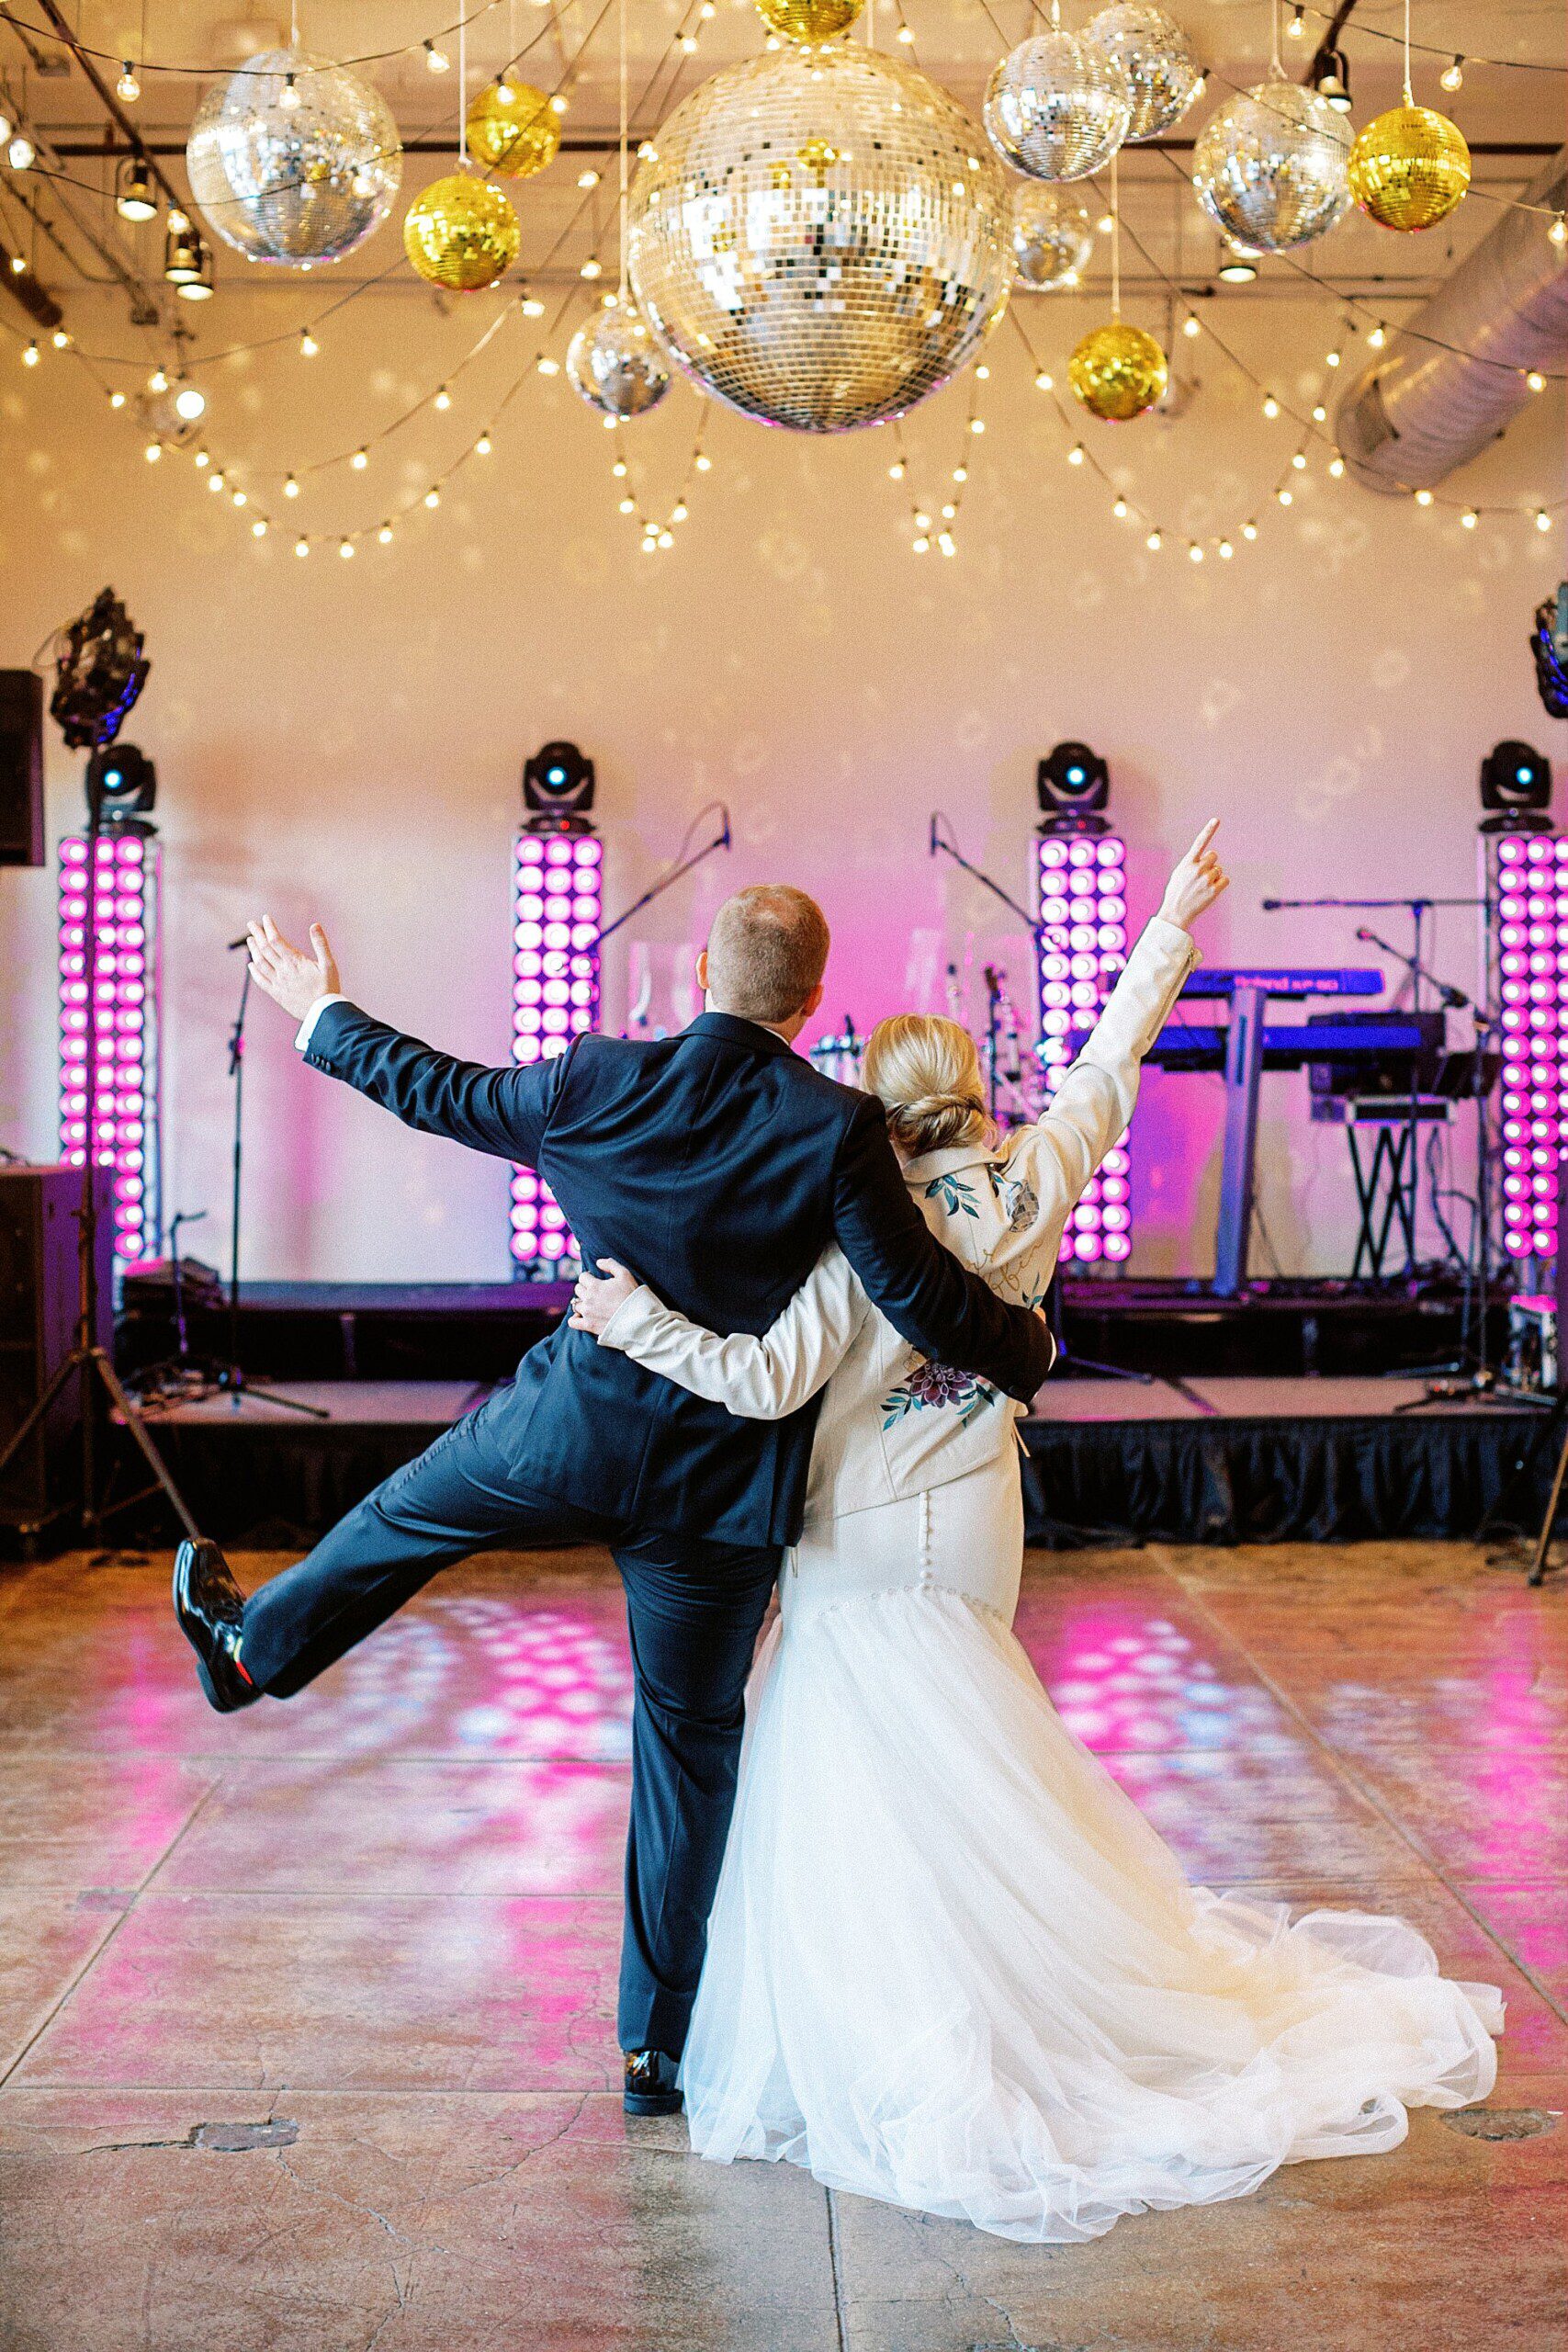 Bride wearing a painted leather jacket and a groom under disco balls at their wedding reception